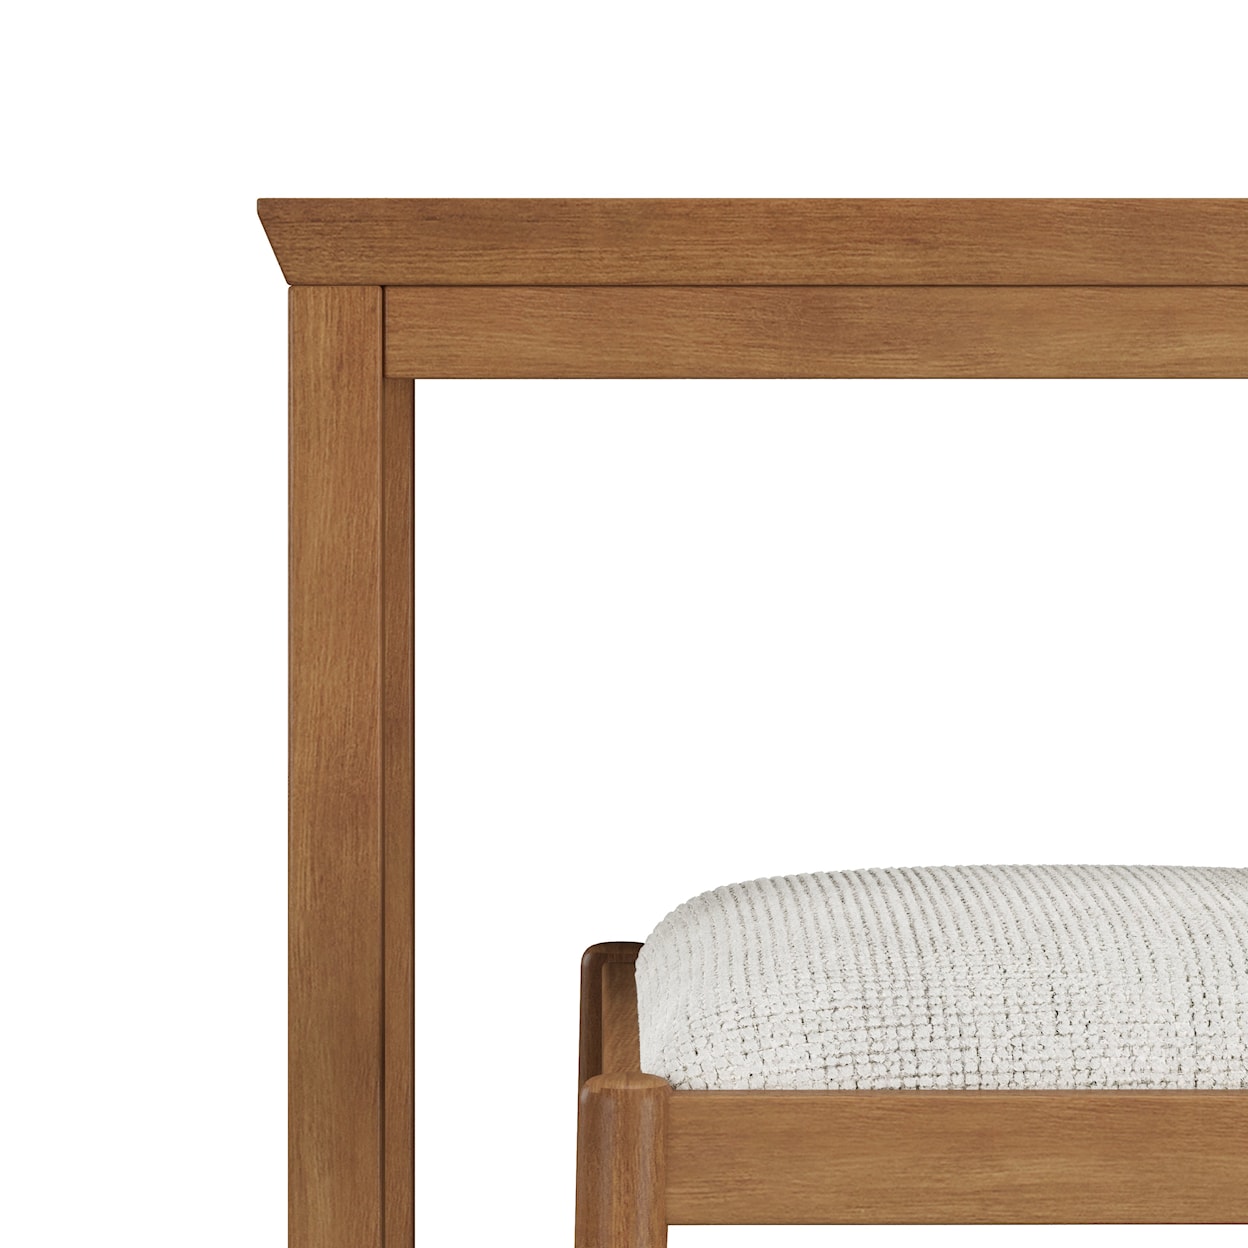 Hillsdale Margo Sofa Table with Stools